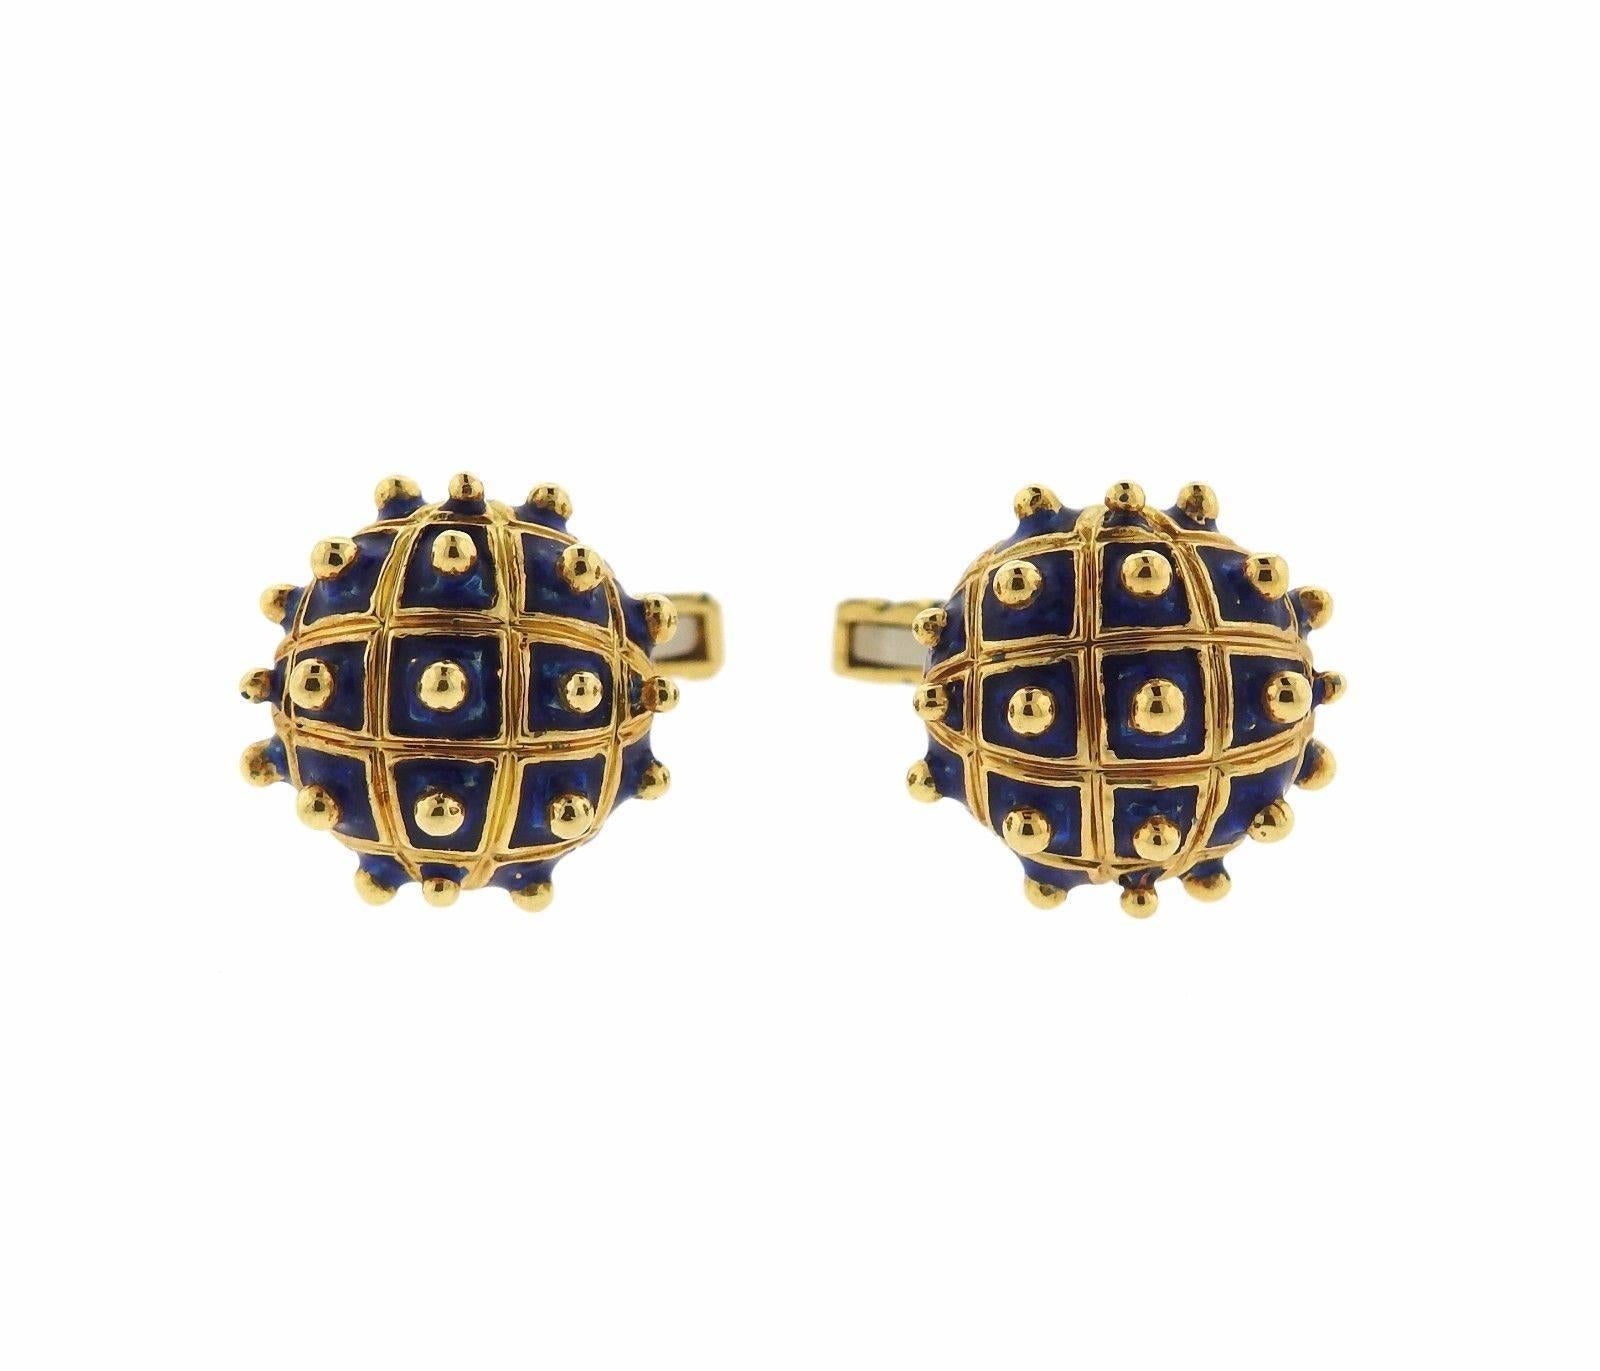 A pair of 18k gold cufflinks adorned with blue enamel.  Crafted by David Webb, the cufflinks are 18mm in diameter and weigh 18.9 grams.  Marked: Webb, 18k.